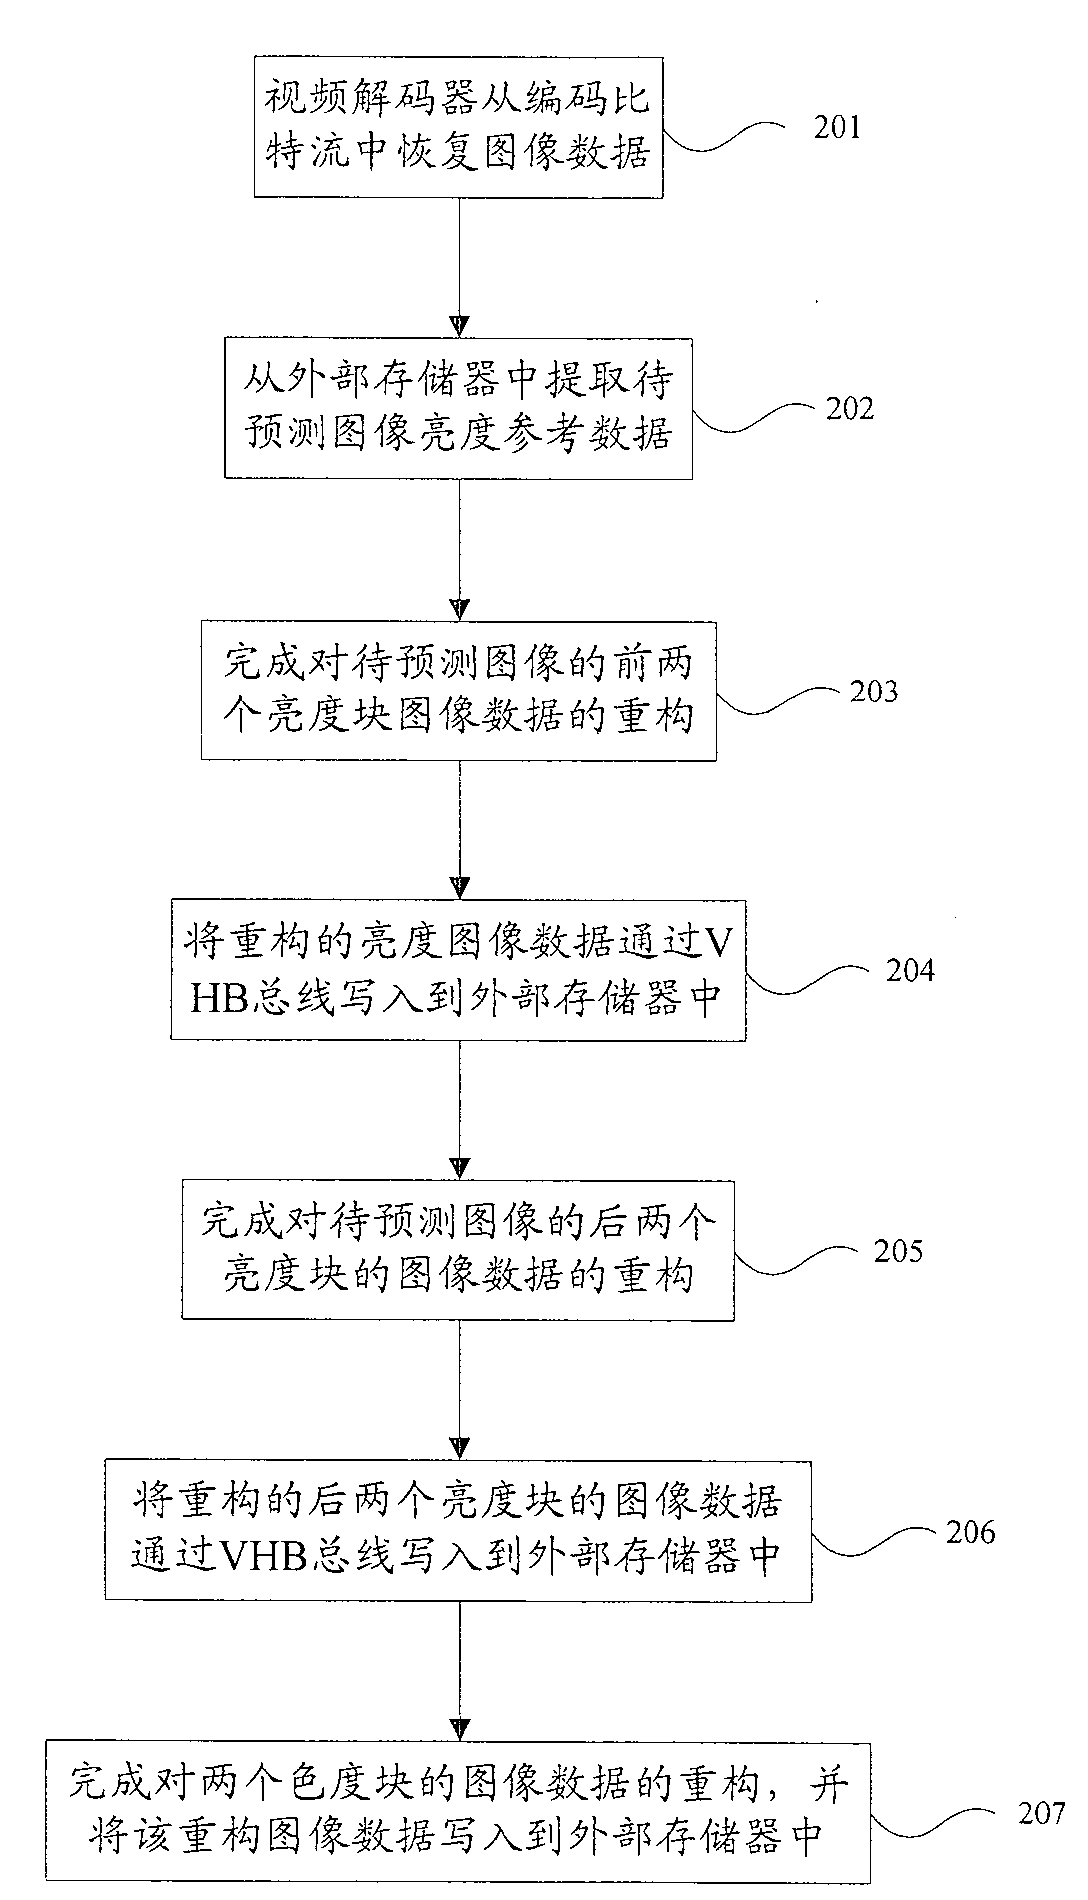 Image data accessing and decoding method and decoding device